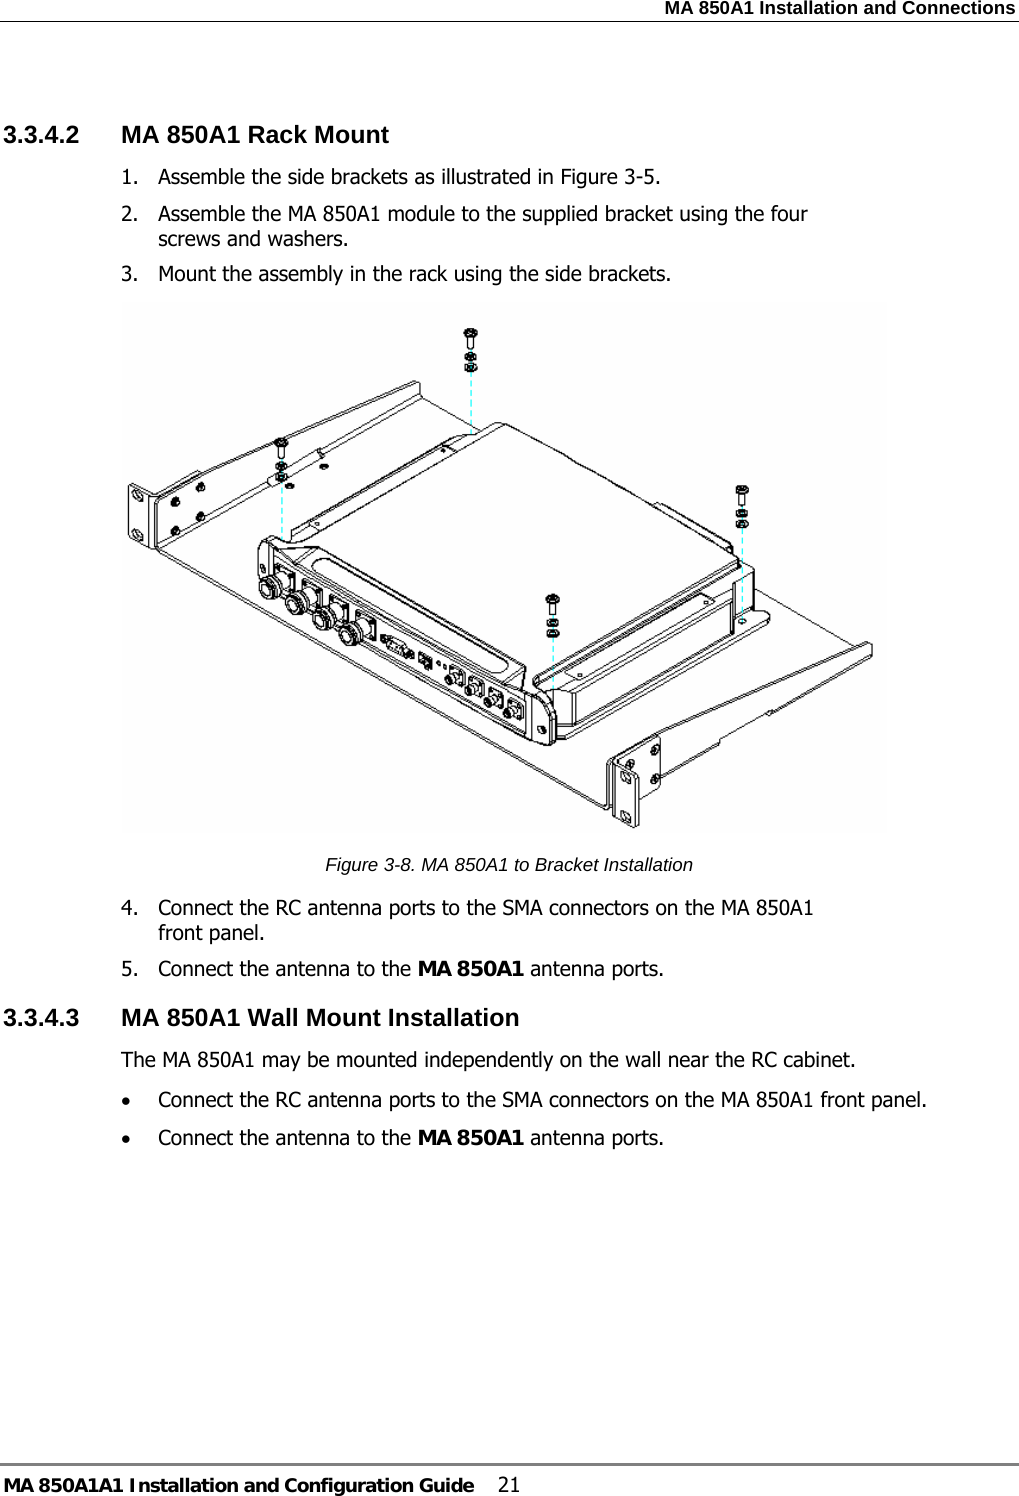 MA 850A1 Installation and Connections MA 850A1A1 Installation and Configuration Guide  21  3.3.4.2  MA 850A1 Rack Mount 1. Assemble the side brackets as illustrated in Figure  3-5. 2. Assemble the MA 850A1 module to the supplied bracket using the four screws and washers. 3. Mount the assembly in the rack using the side brackets.  Figure  3-8. MA 850A1 to Bracket Installation 4. Connect the RC antenna ports to the SMA connectors on the MA 850A1 front panel. 5. Connect the antenna to the MA 850A1 antenna ports. 3.3.4.3  MA 850A1 Wall Mount Installation The MA 850A1 may be mounted independently on the wall near the RC cabinet. • Connect the RC antenna ports to the SMA connectors on the MA 850A1 front panel. • Connect the antenna to the MA 850A1 antenna ports. 